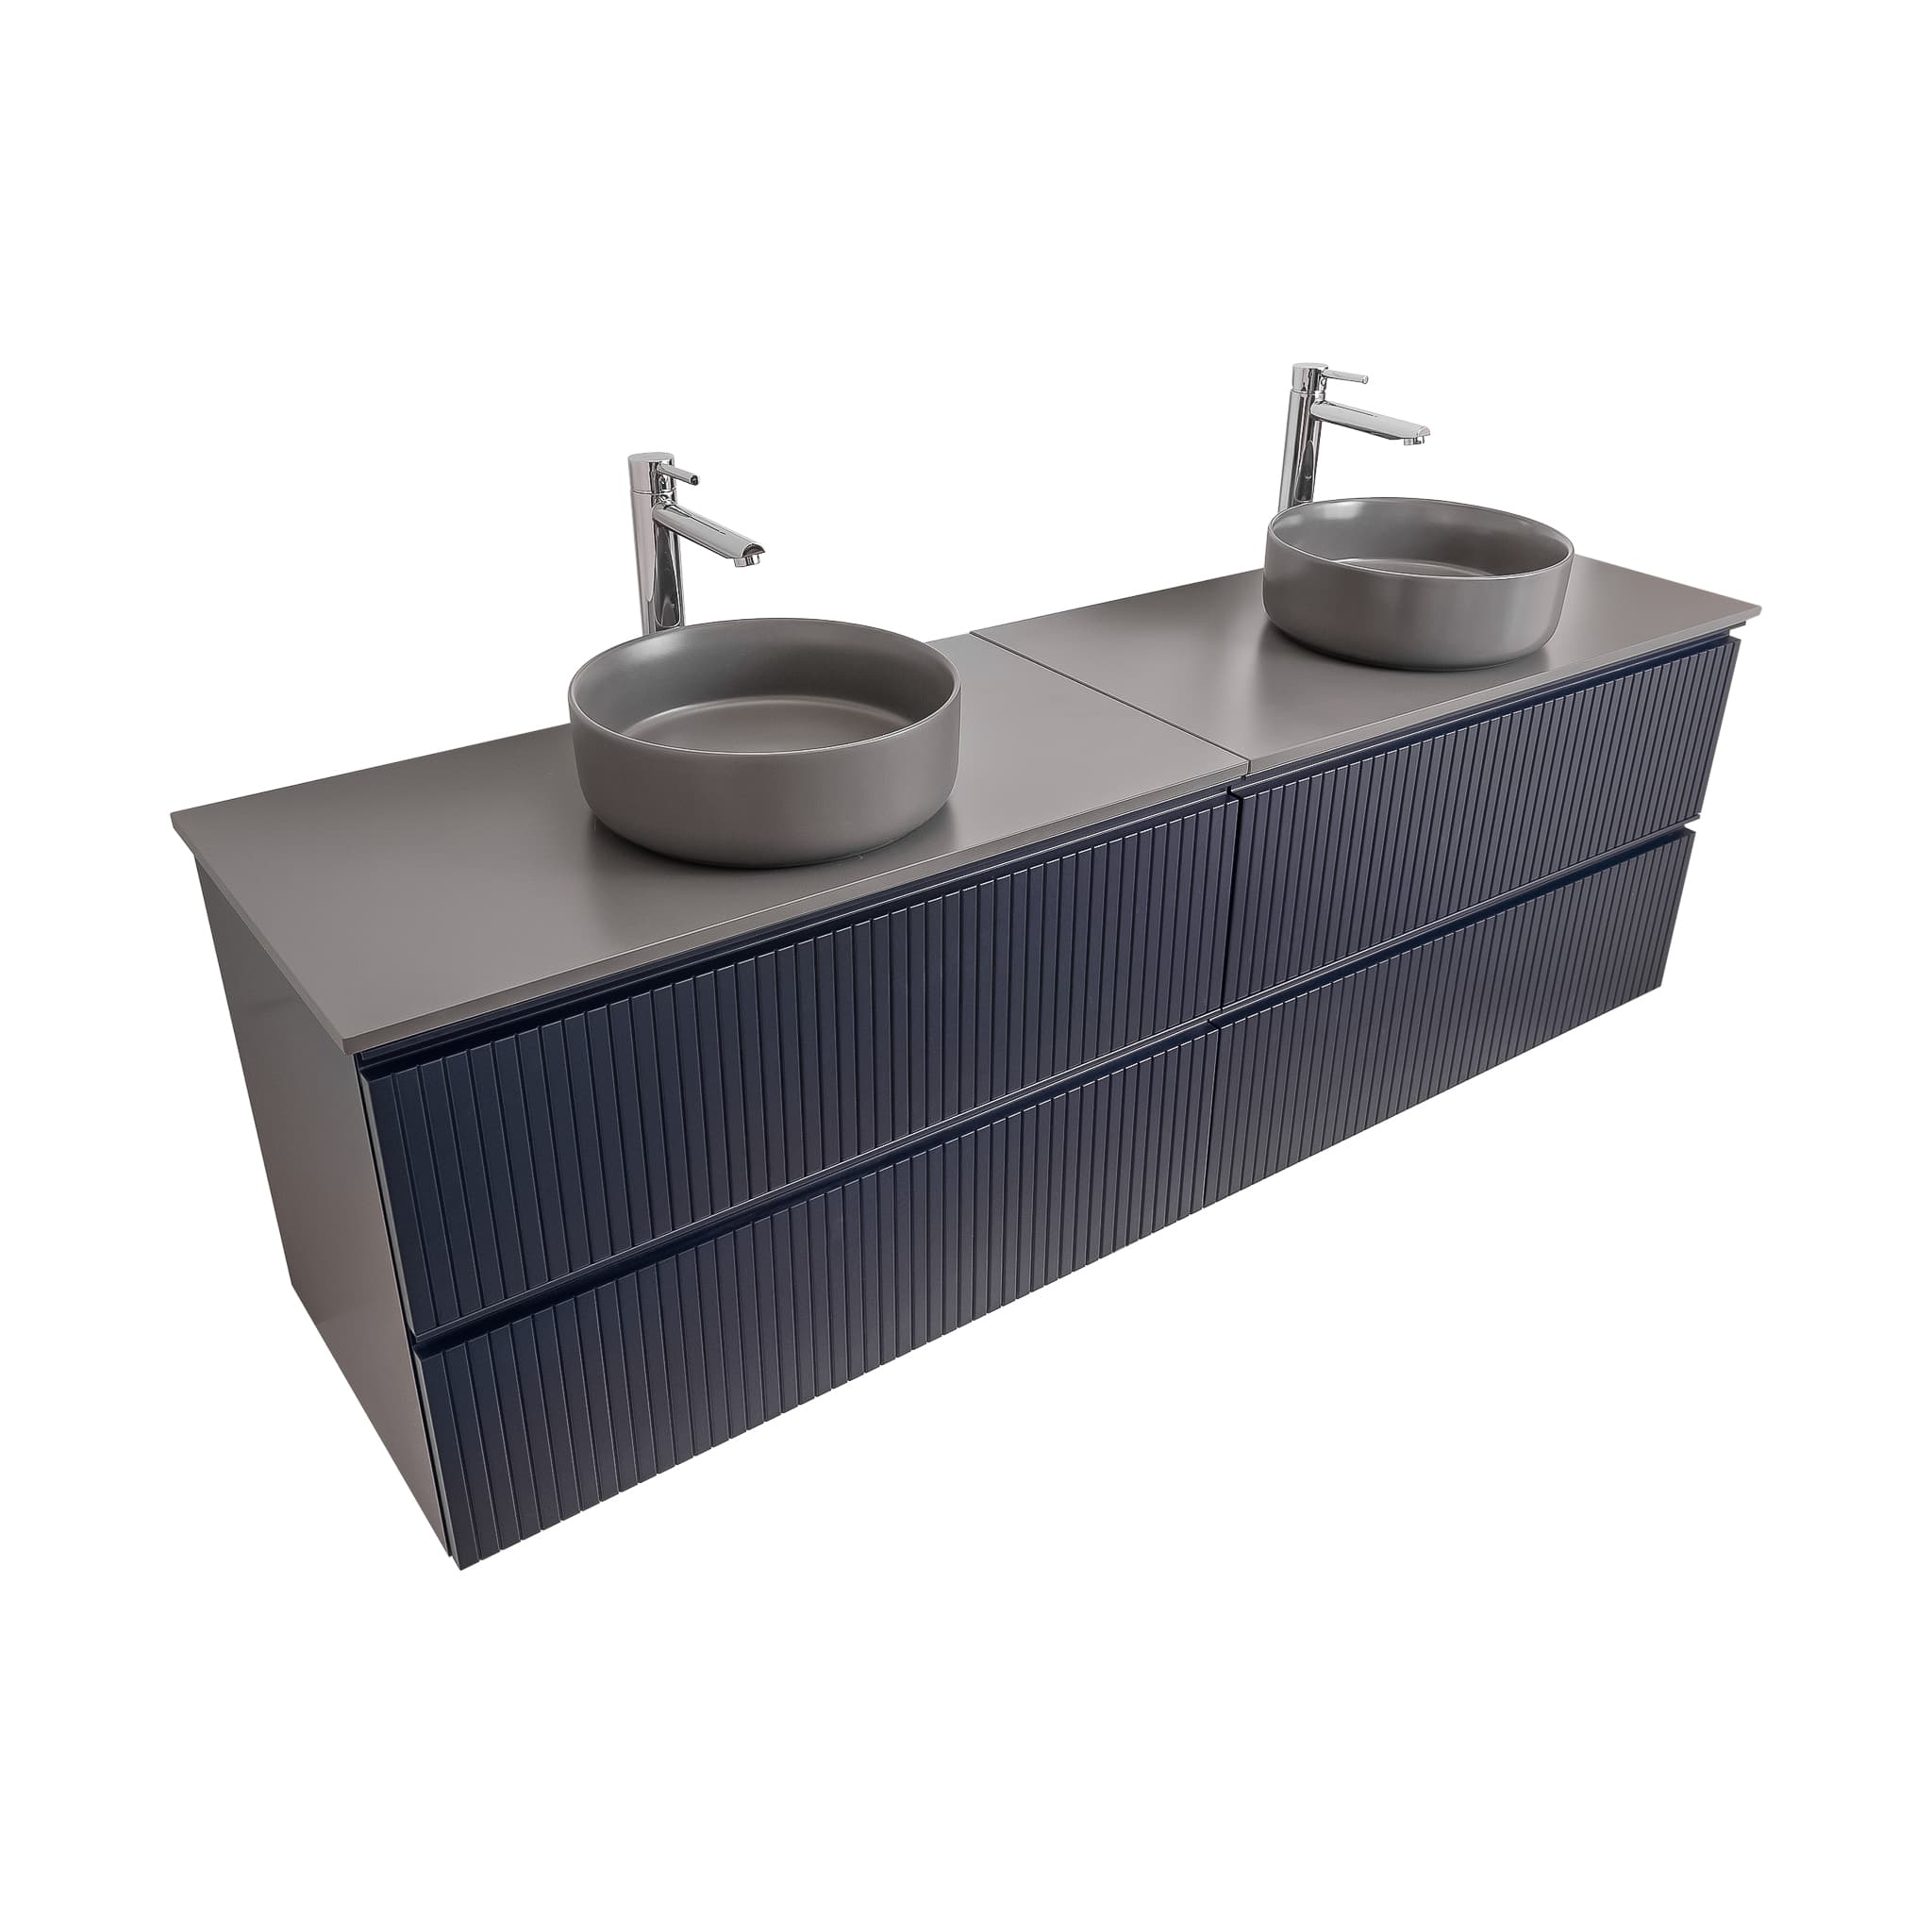 Ares 63 Matte Navy Blue Cabinet, Ares Grey Ceniza Top And Two Ares Grey Ceniza Ceramic Basin, Wall Mounted Modern Vanity Set